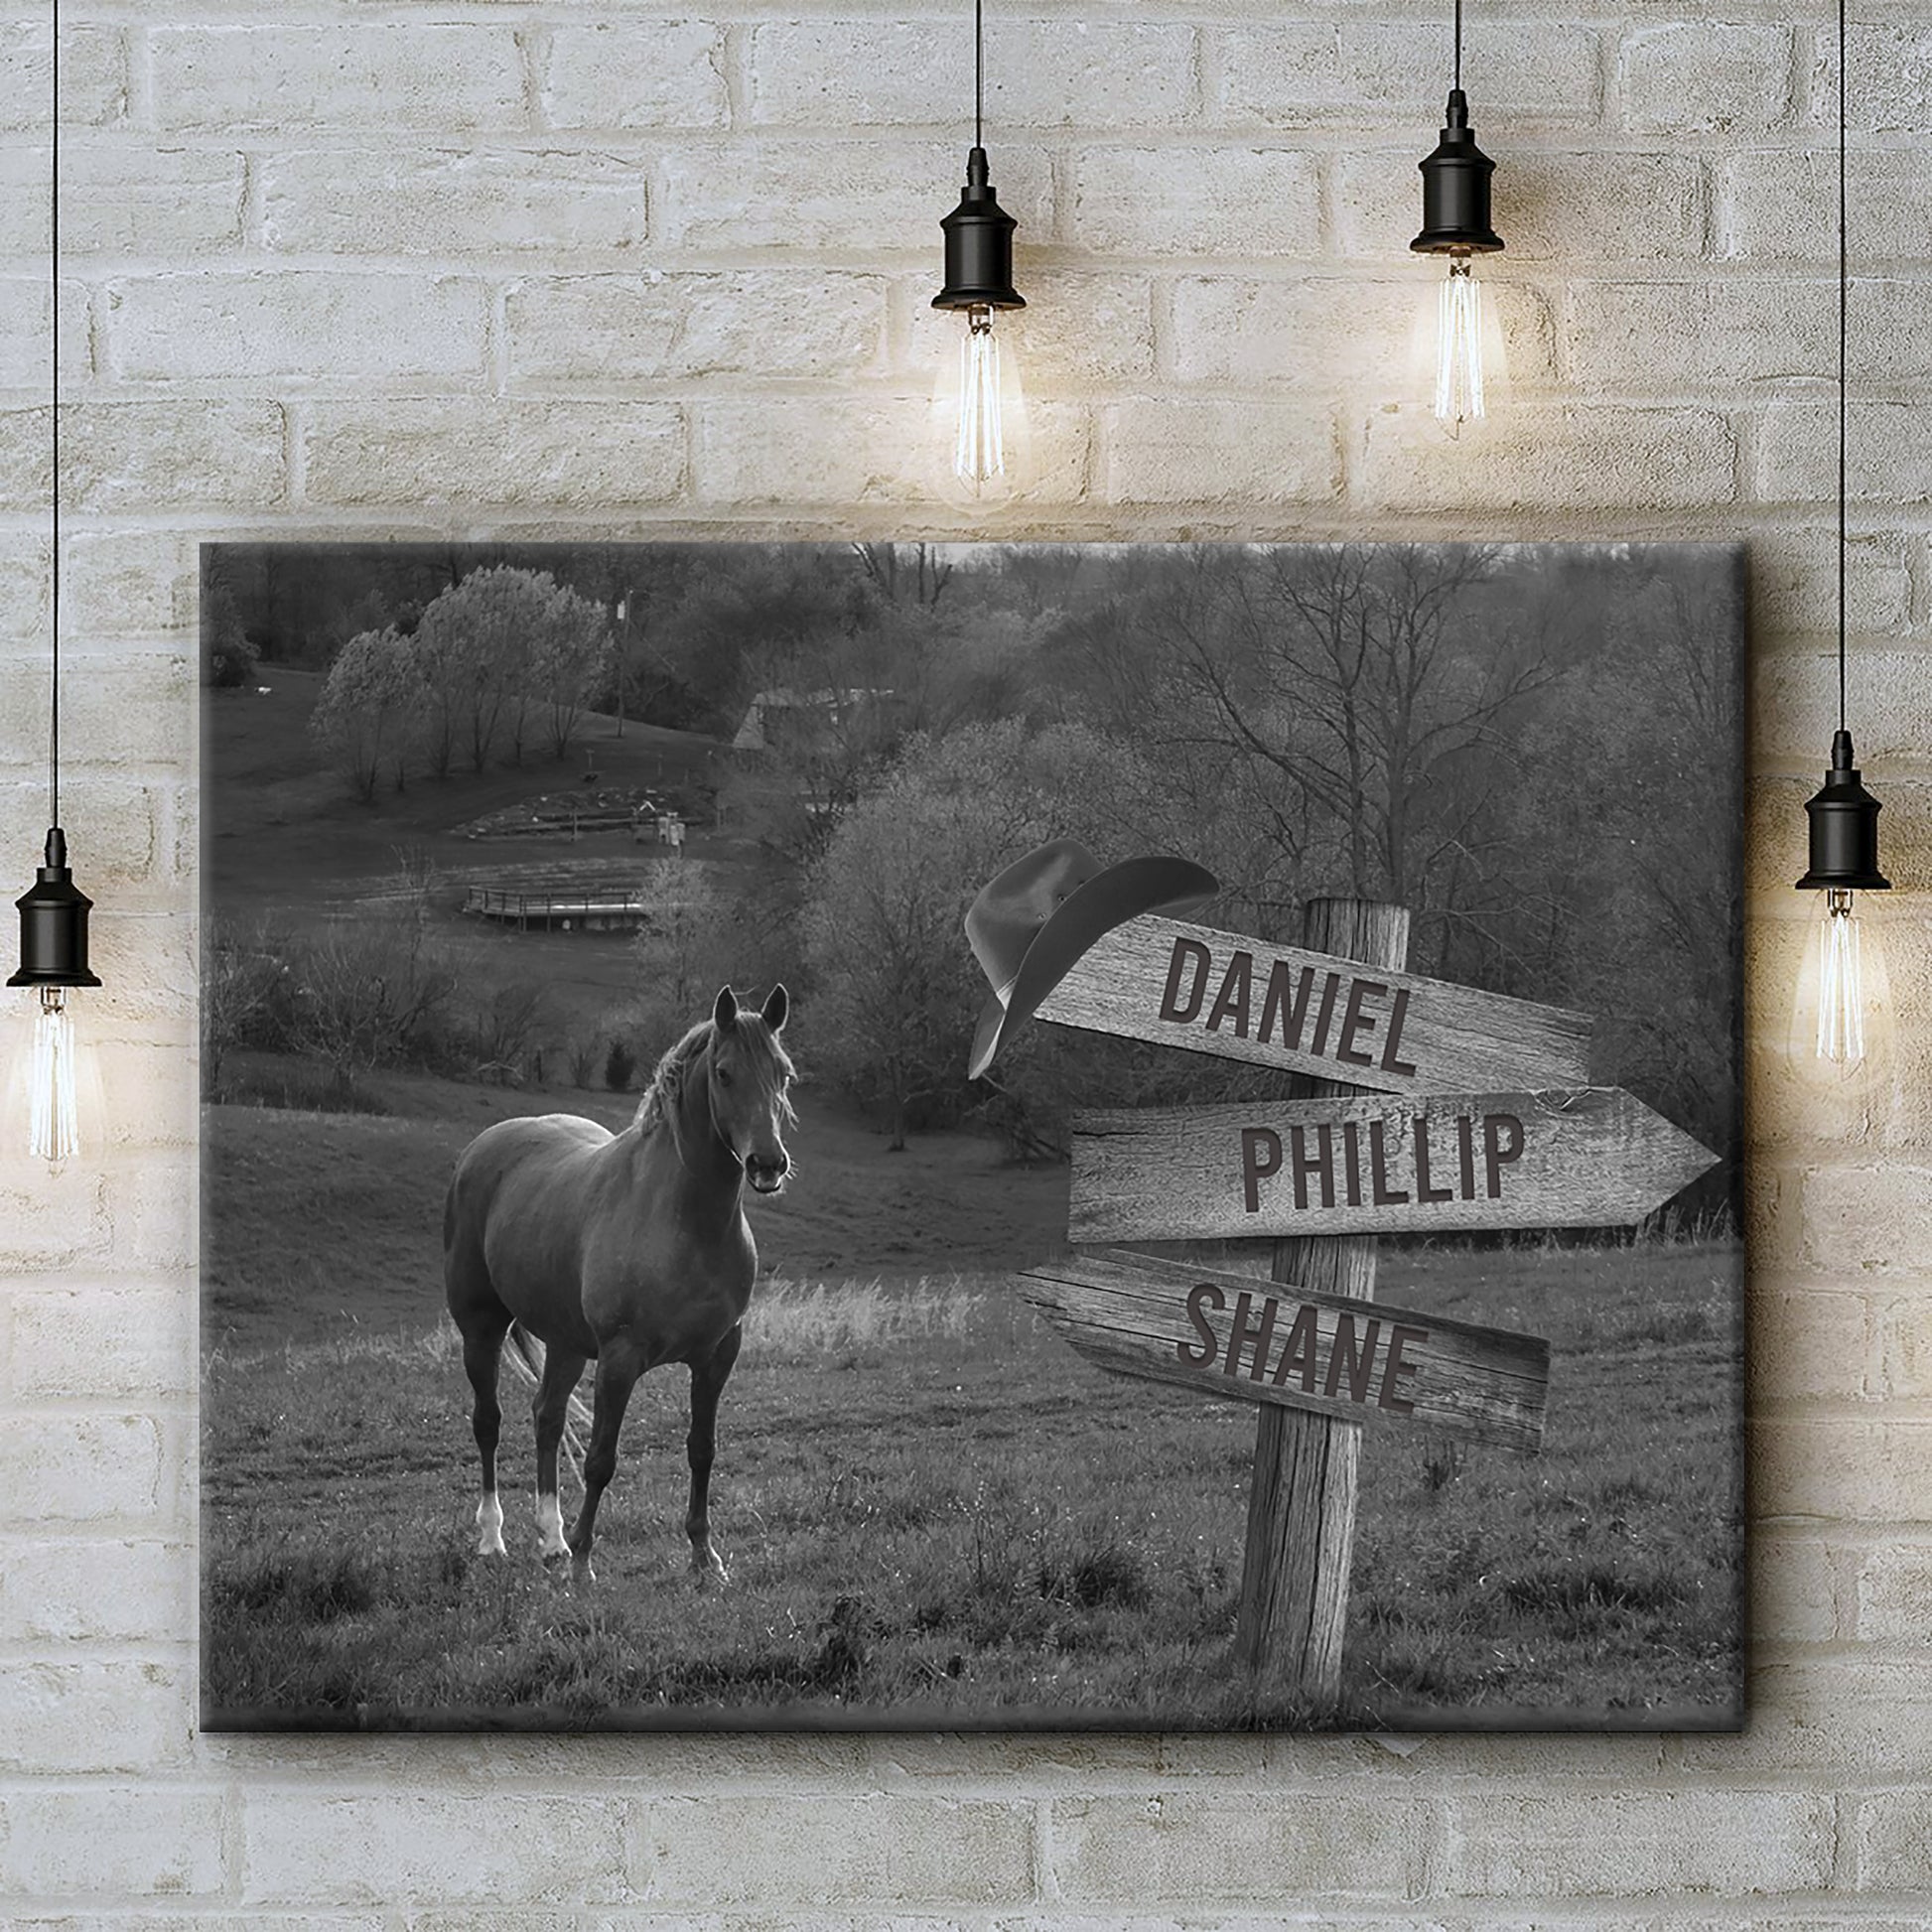 Monochrome Horse Name Sign - Image by Tailored Canvases